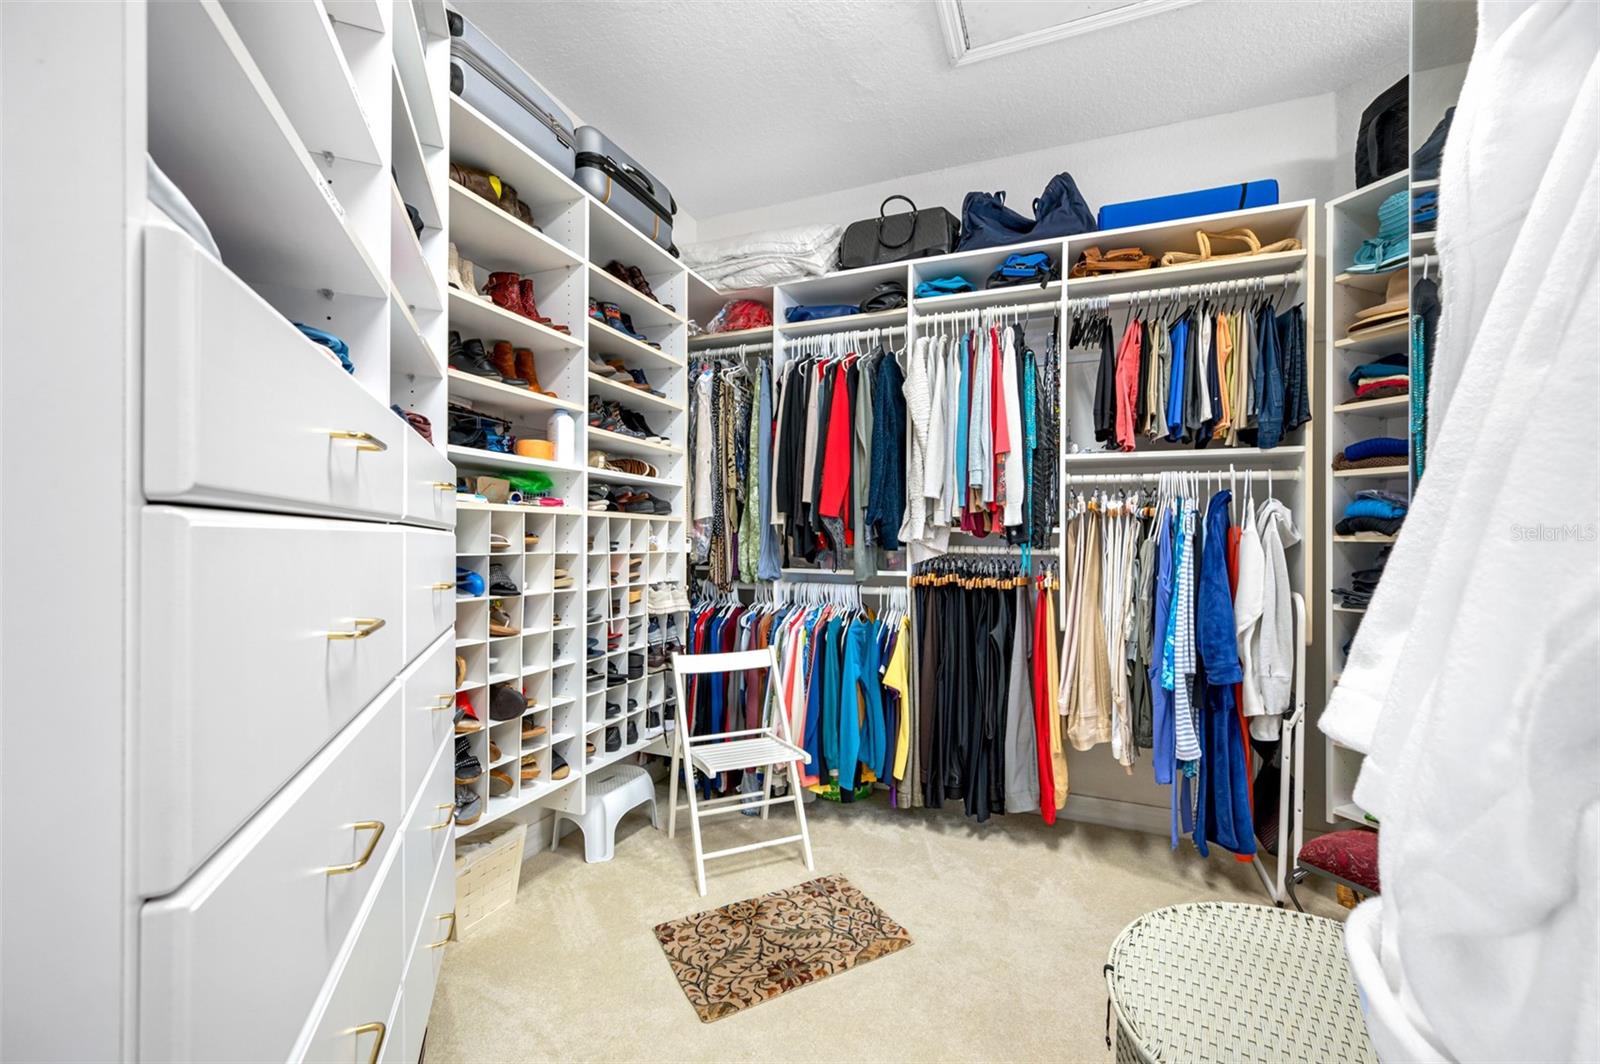 Expansive his-and-hers walk-in closets